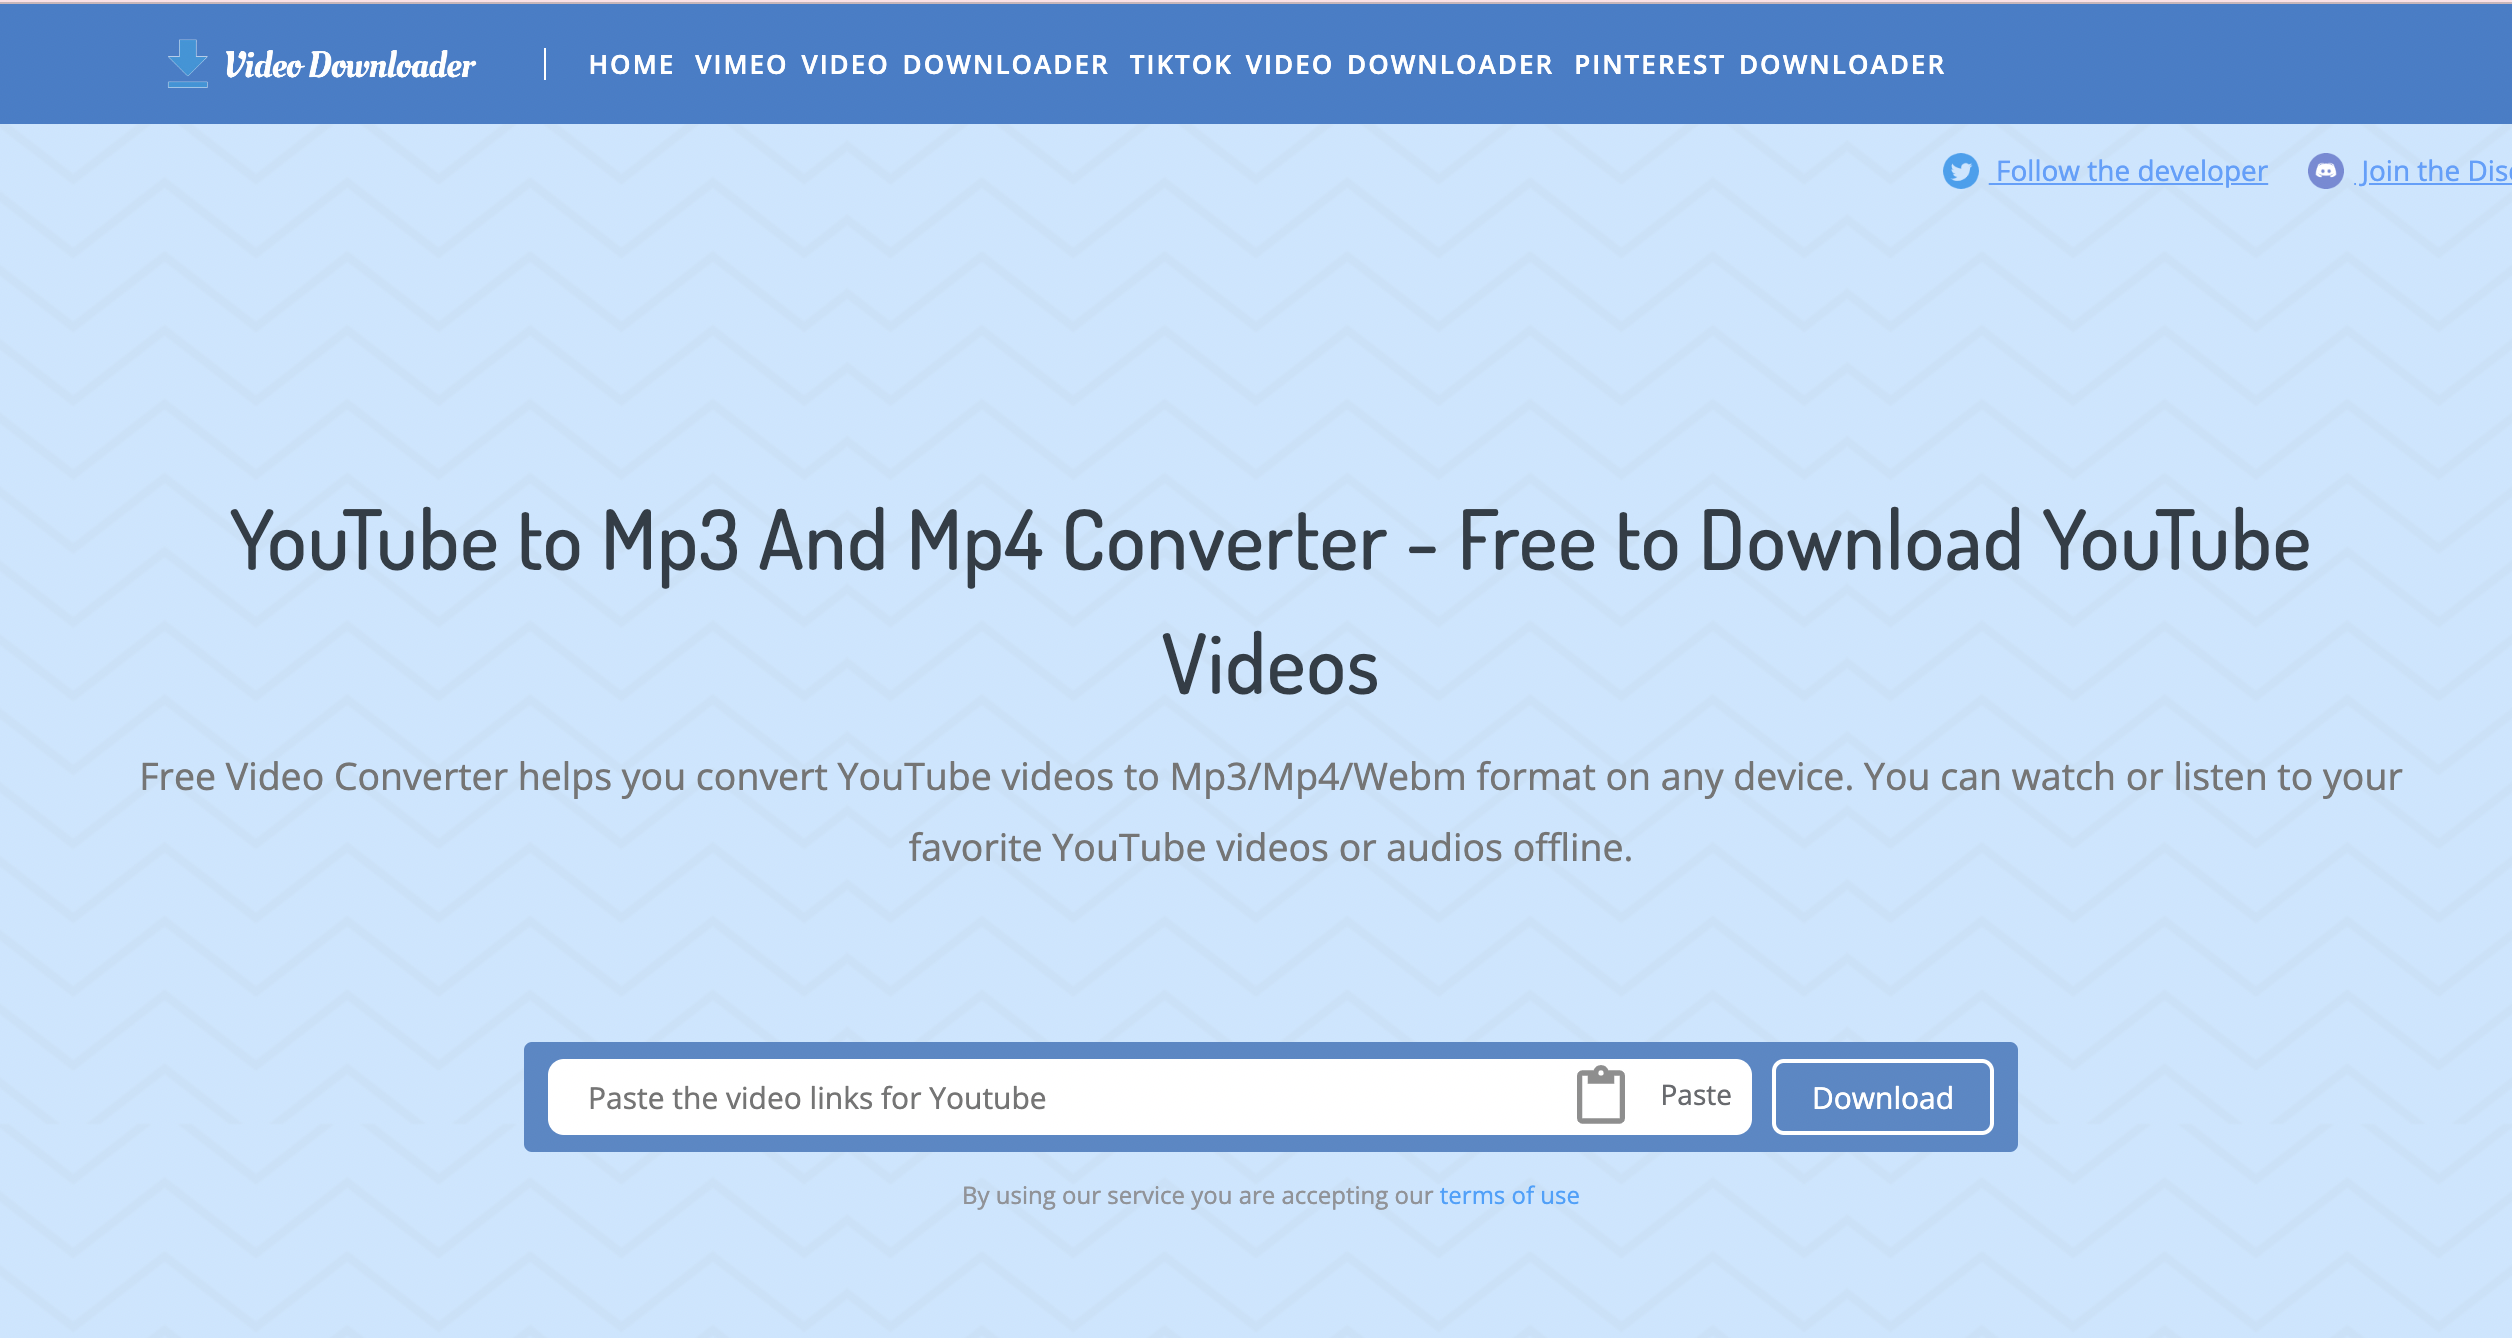 DMsave - YouTube to Mp3 And Mp4 Converter